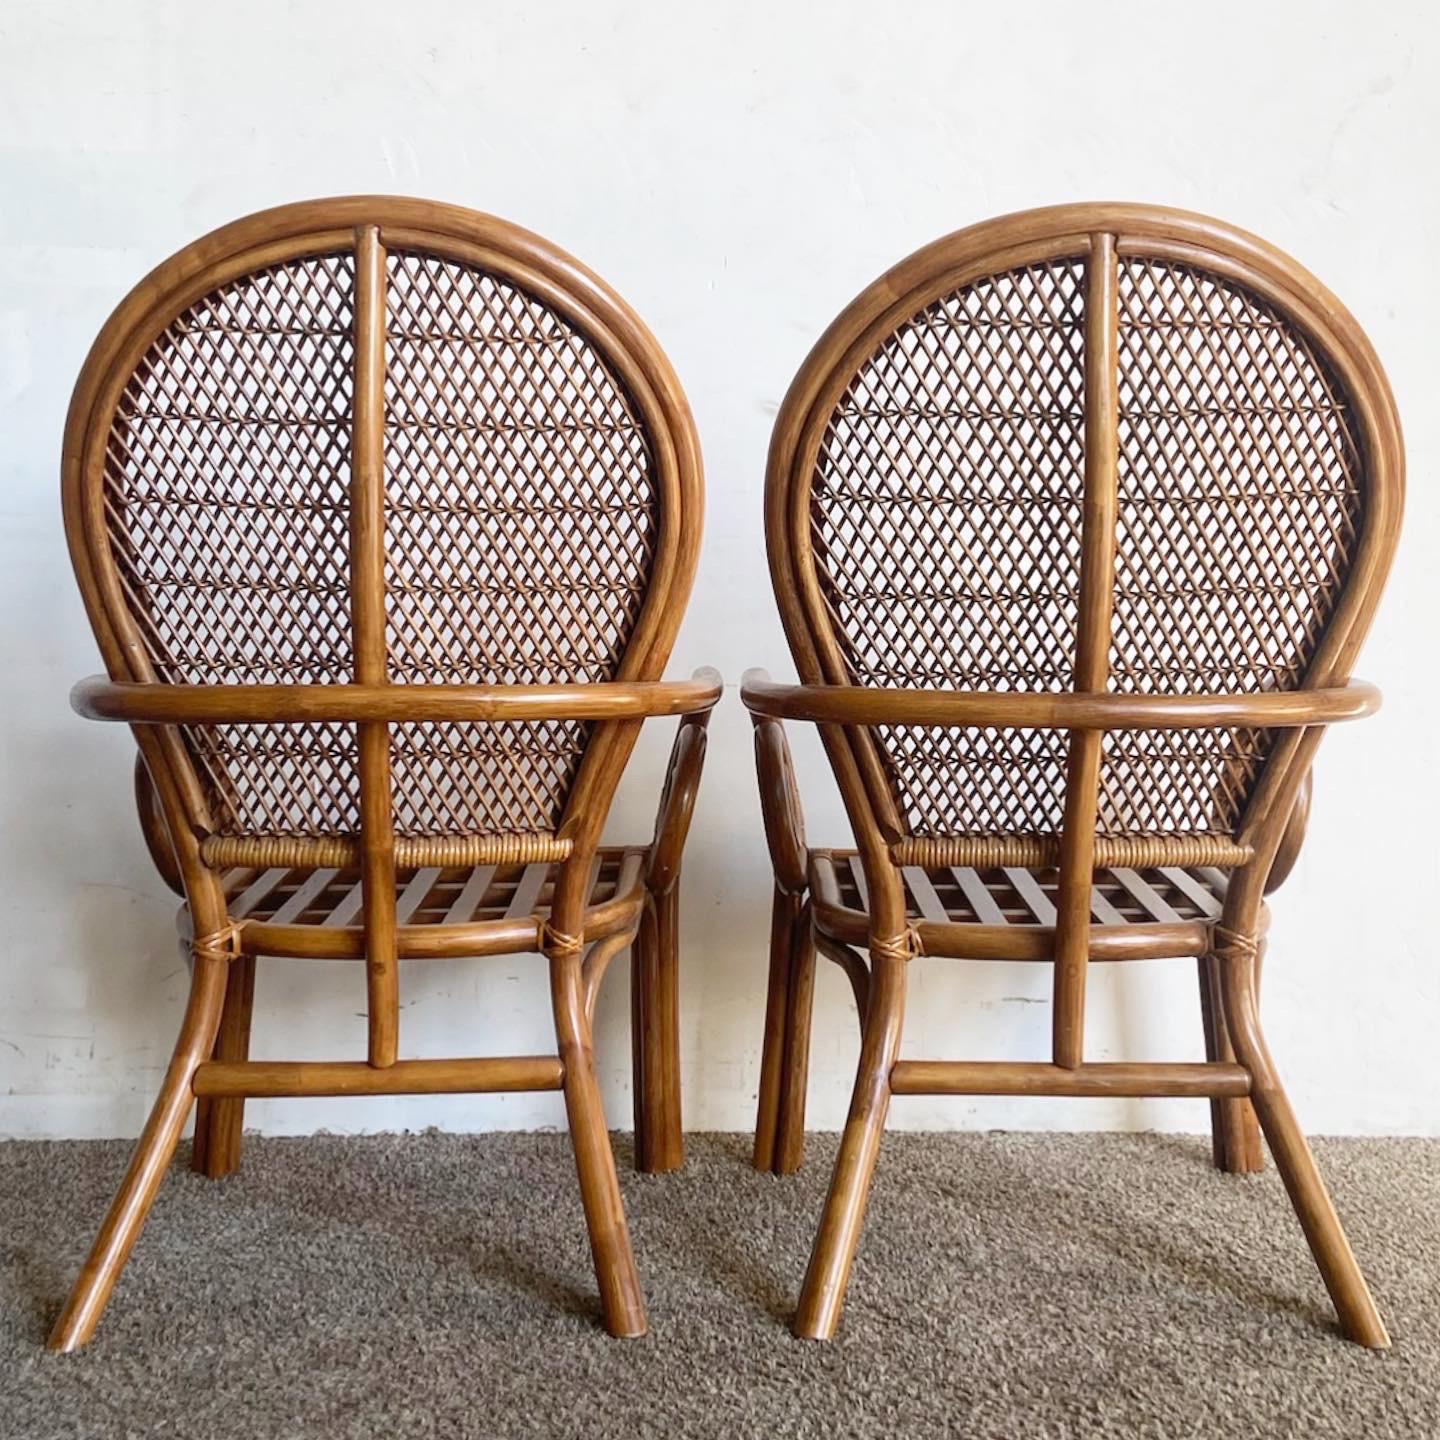 Experience relaxed elegance with these Boho Chic Bamboo Rattan Balloon Back Swirl Arm Chairs. Intricately woven rattan meets artistic swirl armrests for a chair that offers both style and comfort. Perfect for dining or cozy reading nooks, these